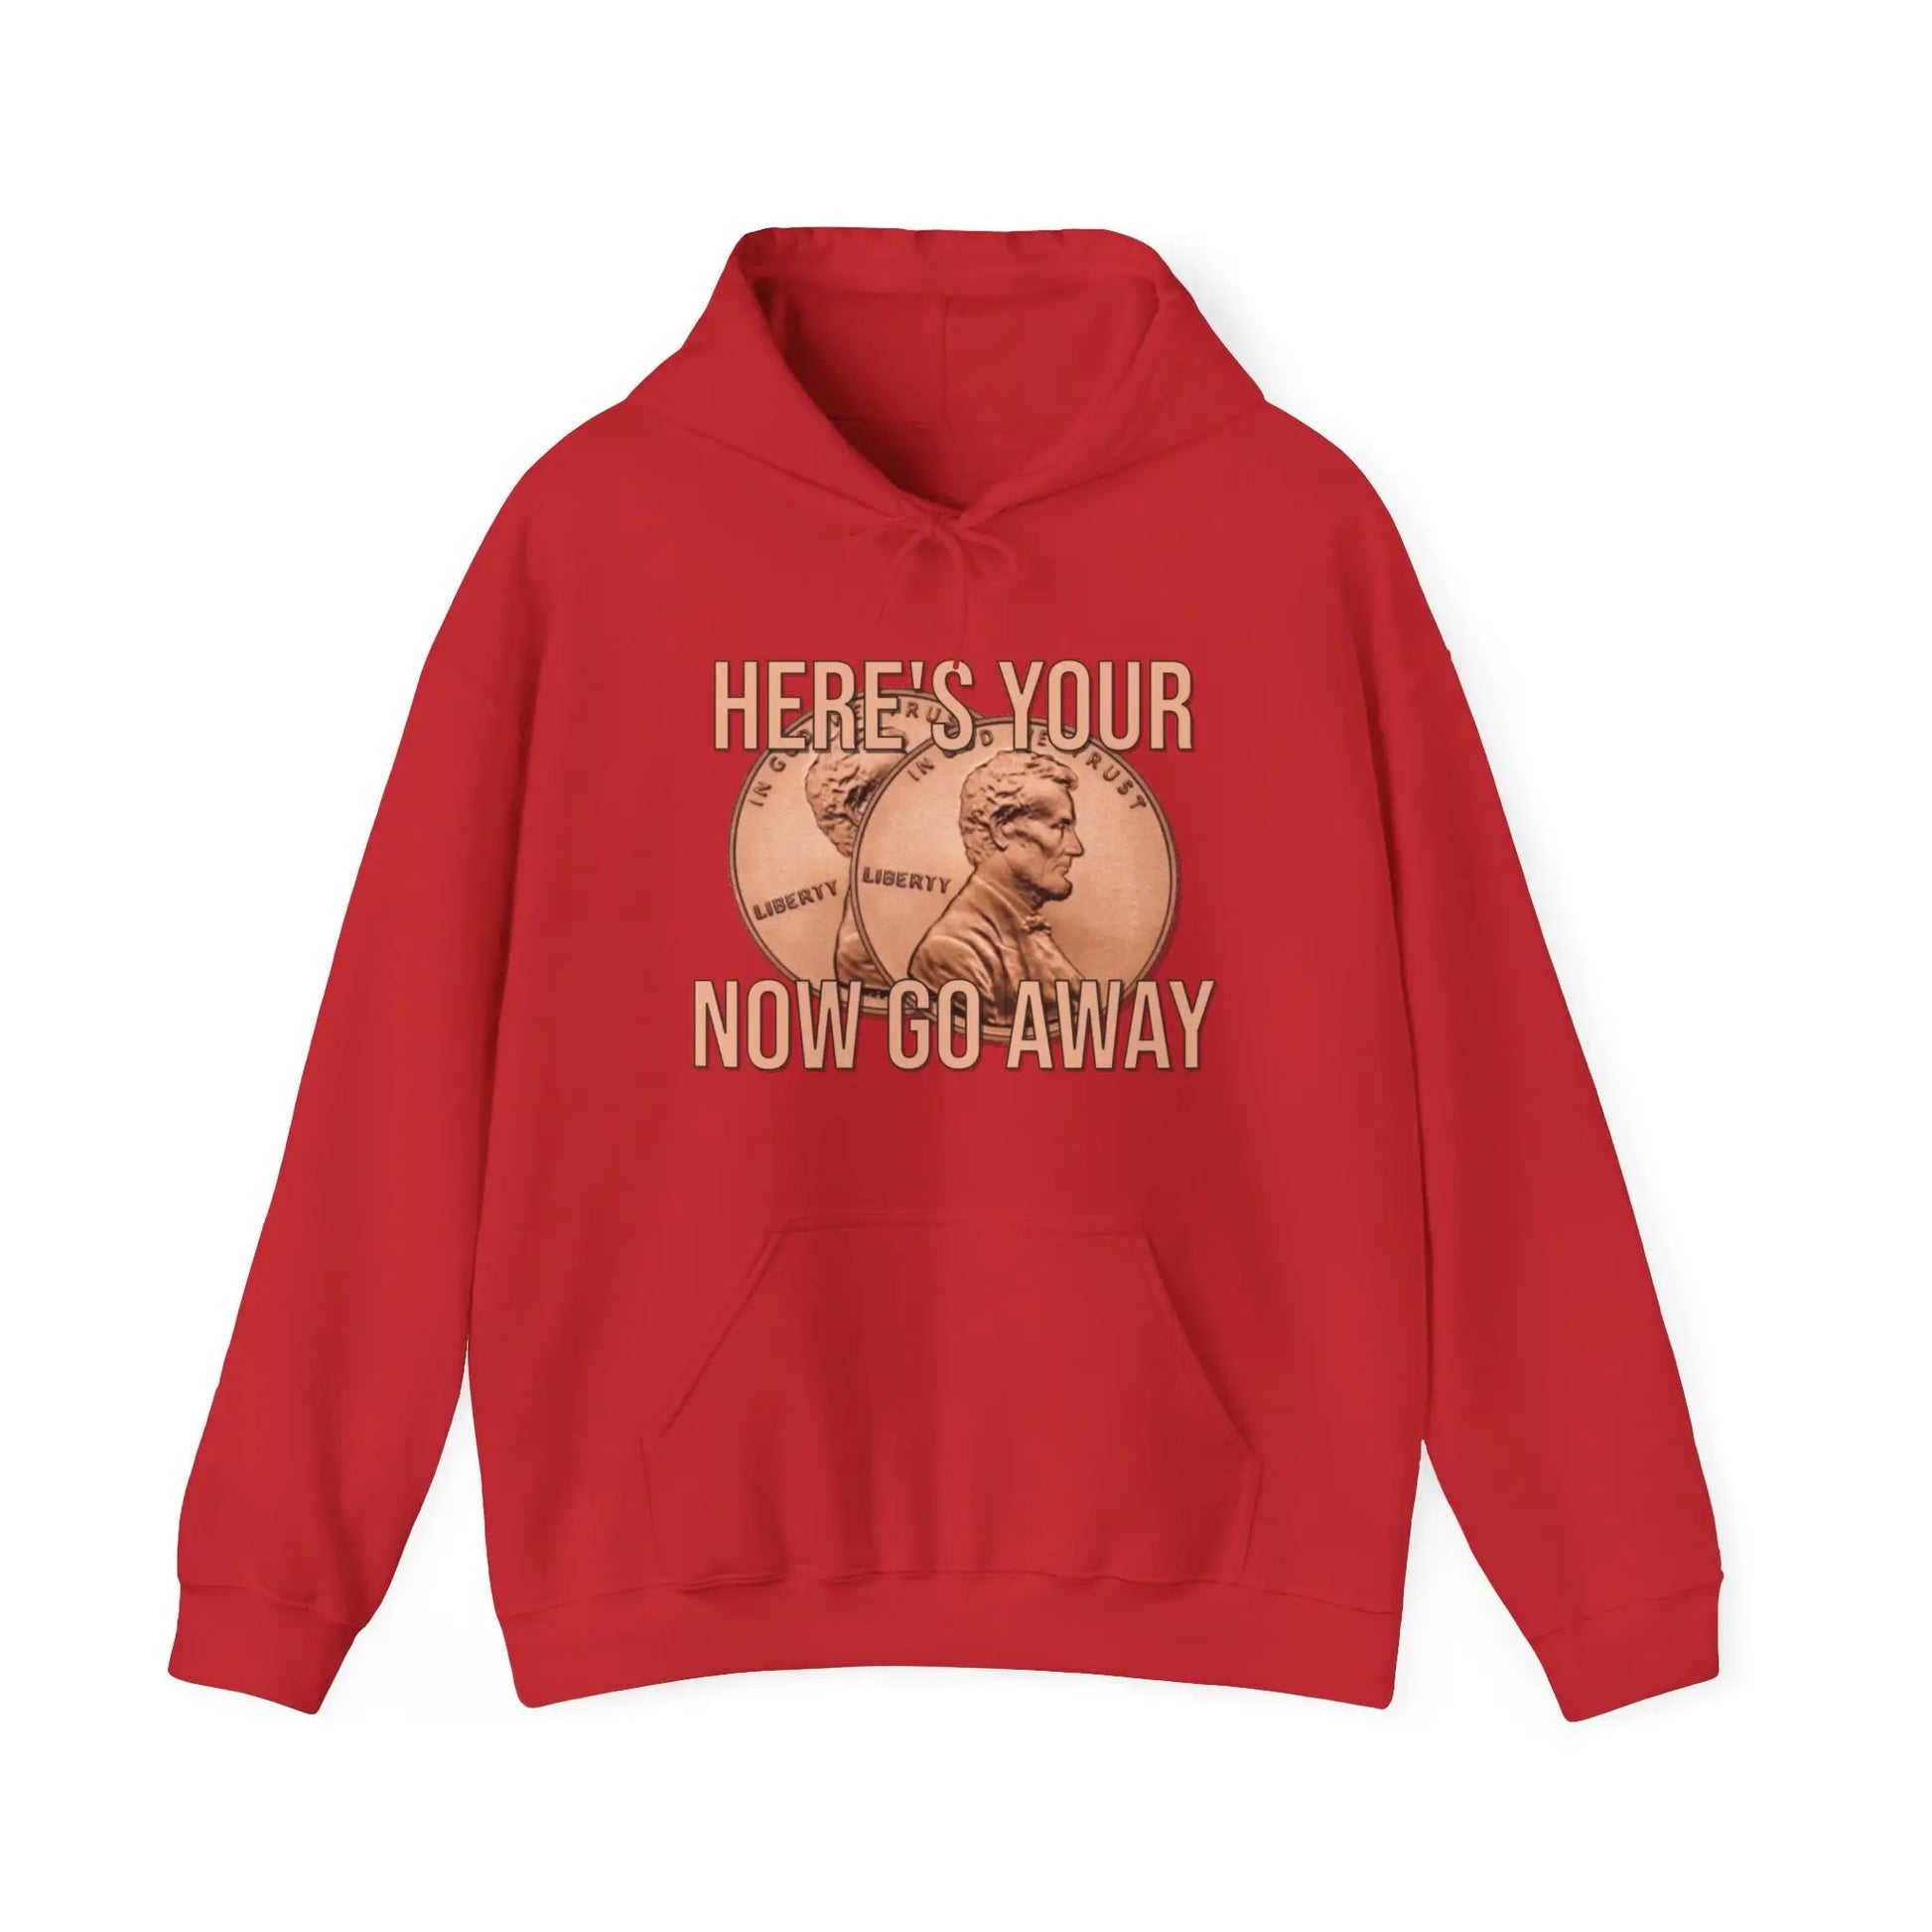 Here's Your Two Cents Men's Hooded Sweatshirt - Wicked Tees